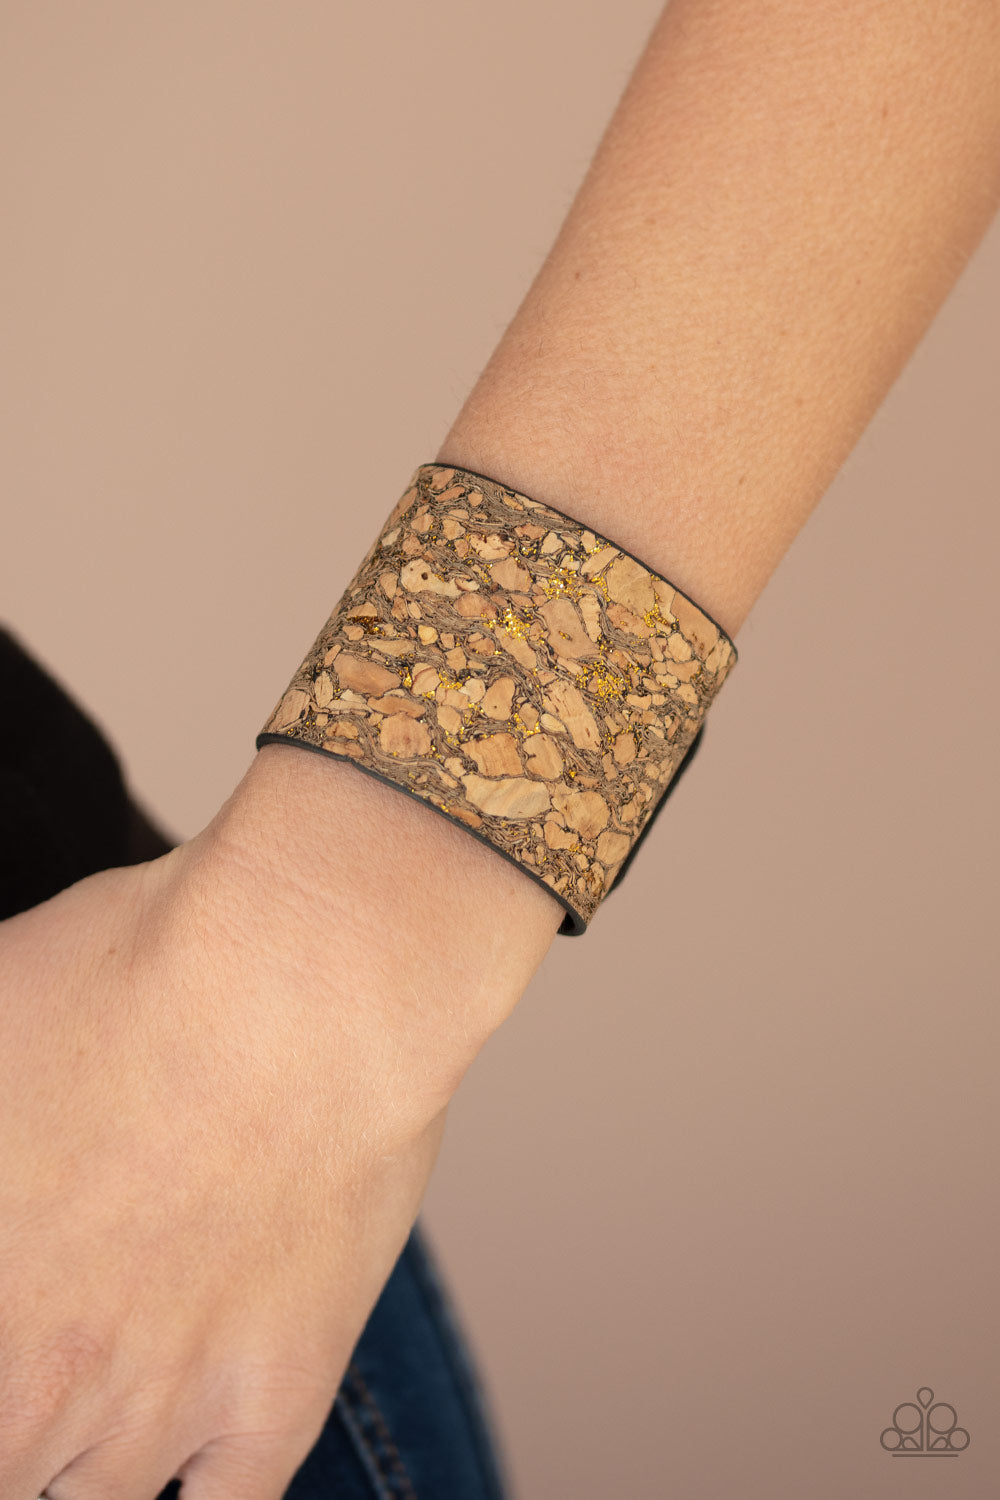 Pieces of cork have been plastered across the front of a black leather band, creating an earthy look around the wrist. Specks of glittery brass accents are sprinkled across the front for a flashy finish. Features an adjustable snap closure.  Sold as one individual bracelet.